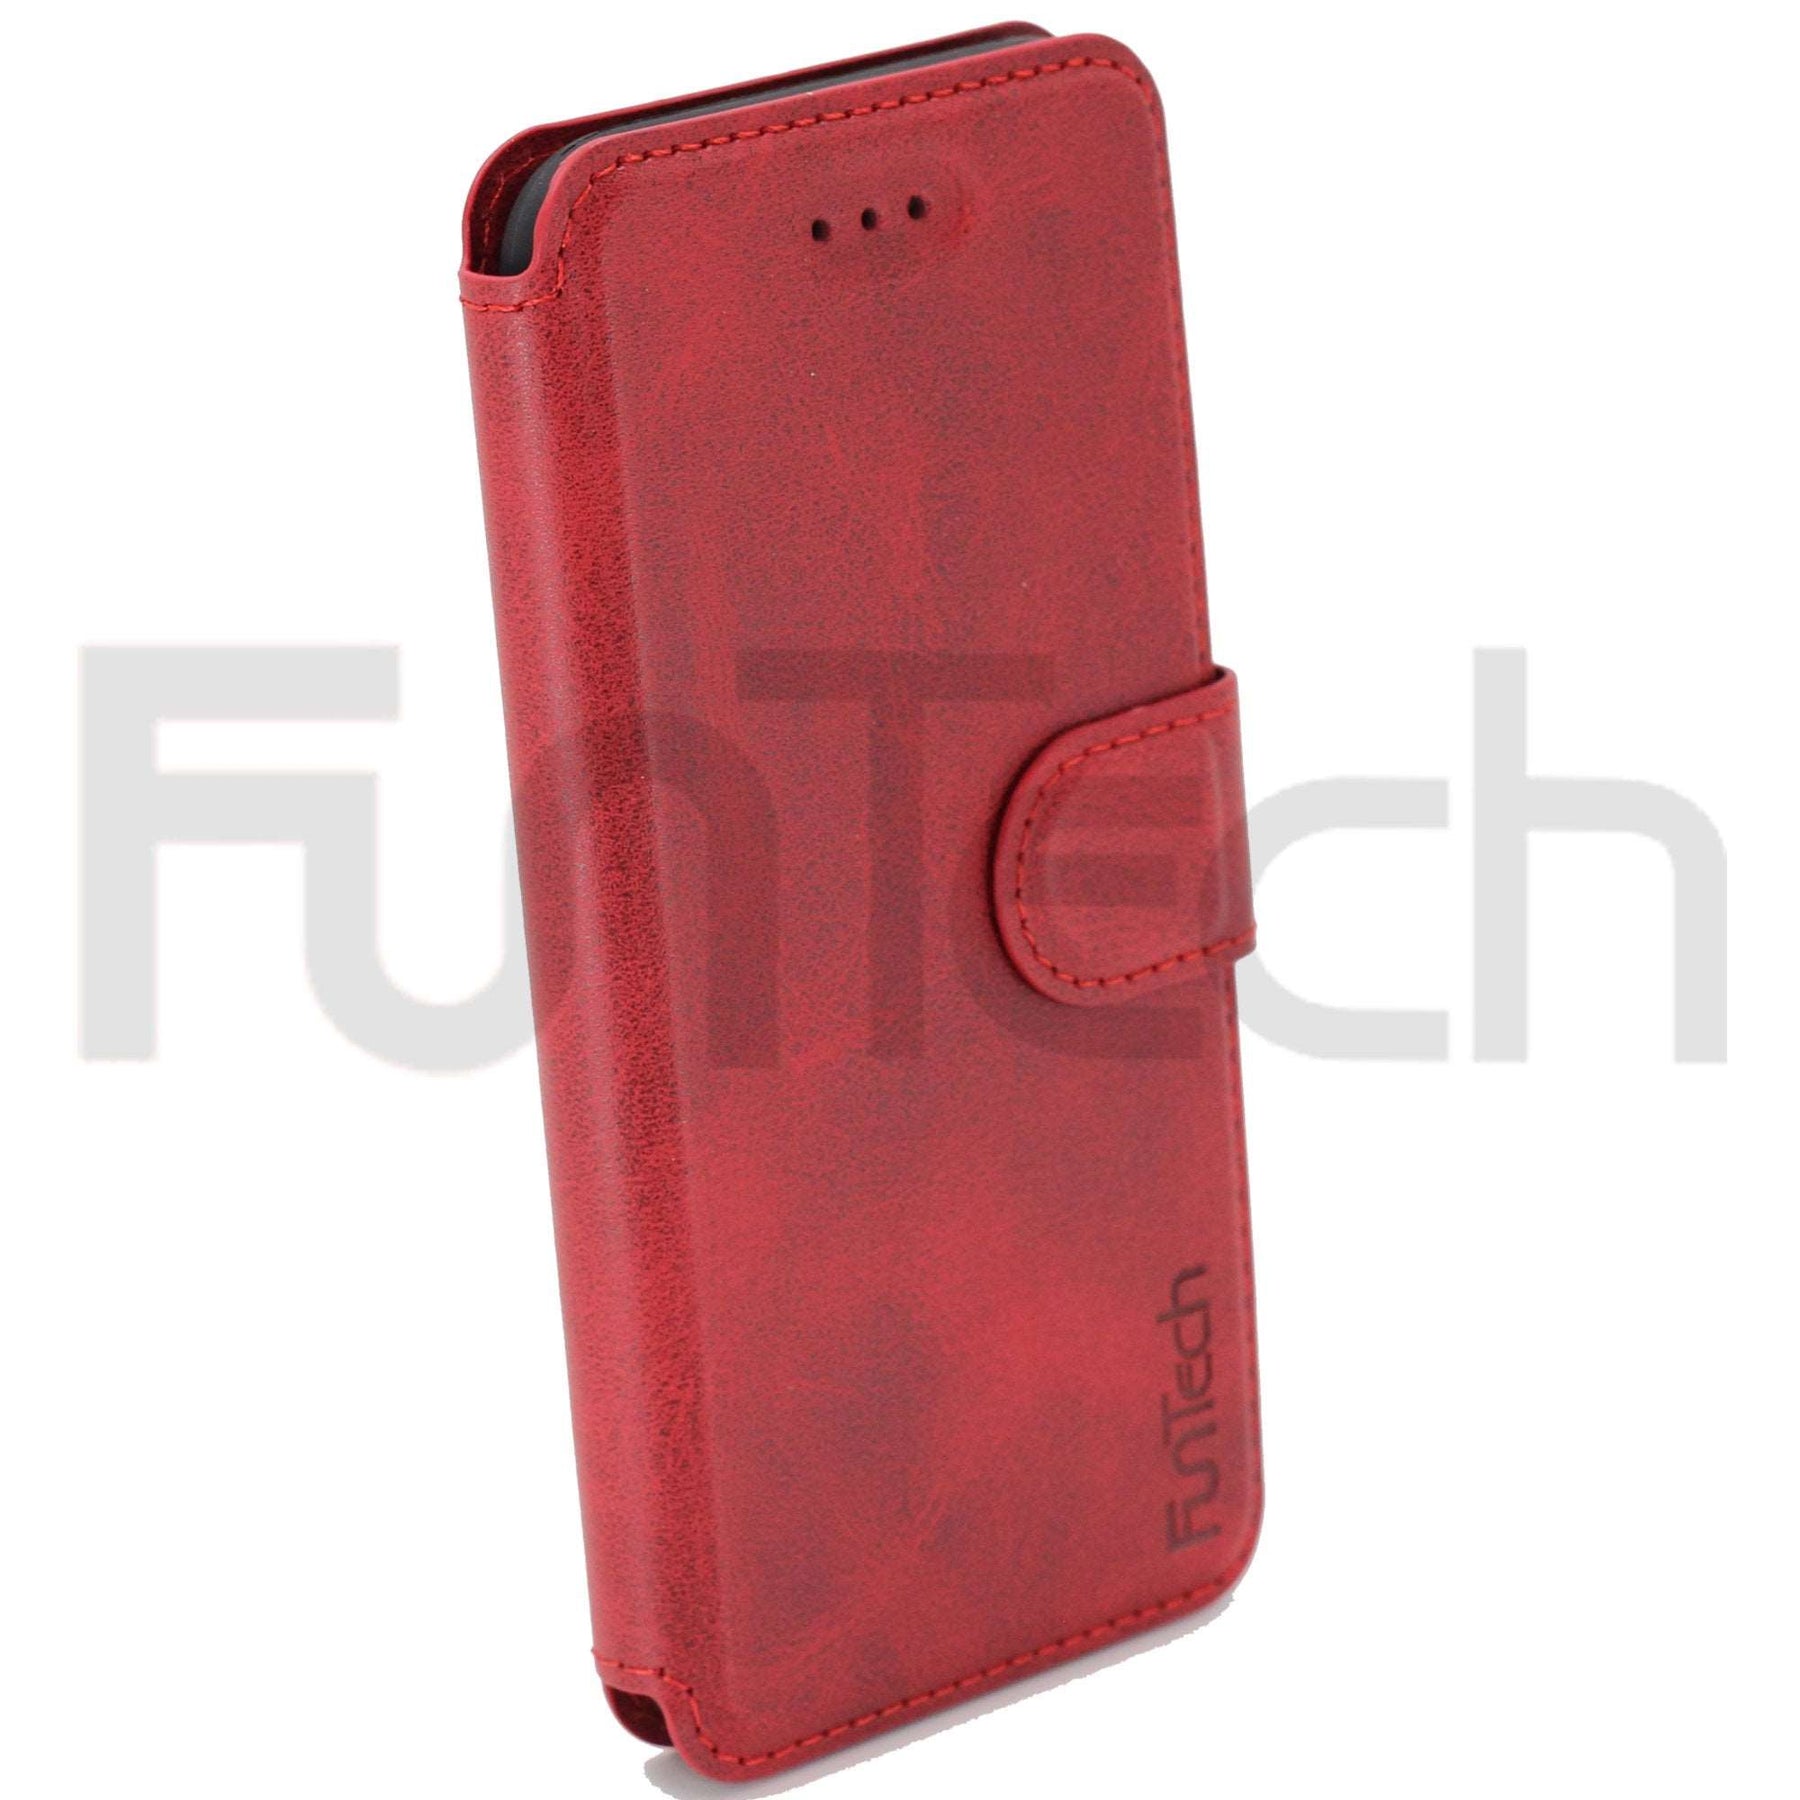 Apple iPhone 7/8 SE2020 Leather Case Red